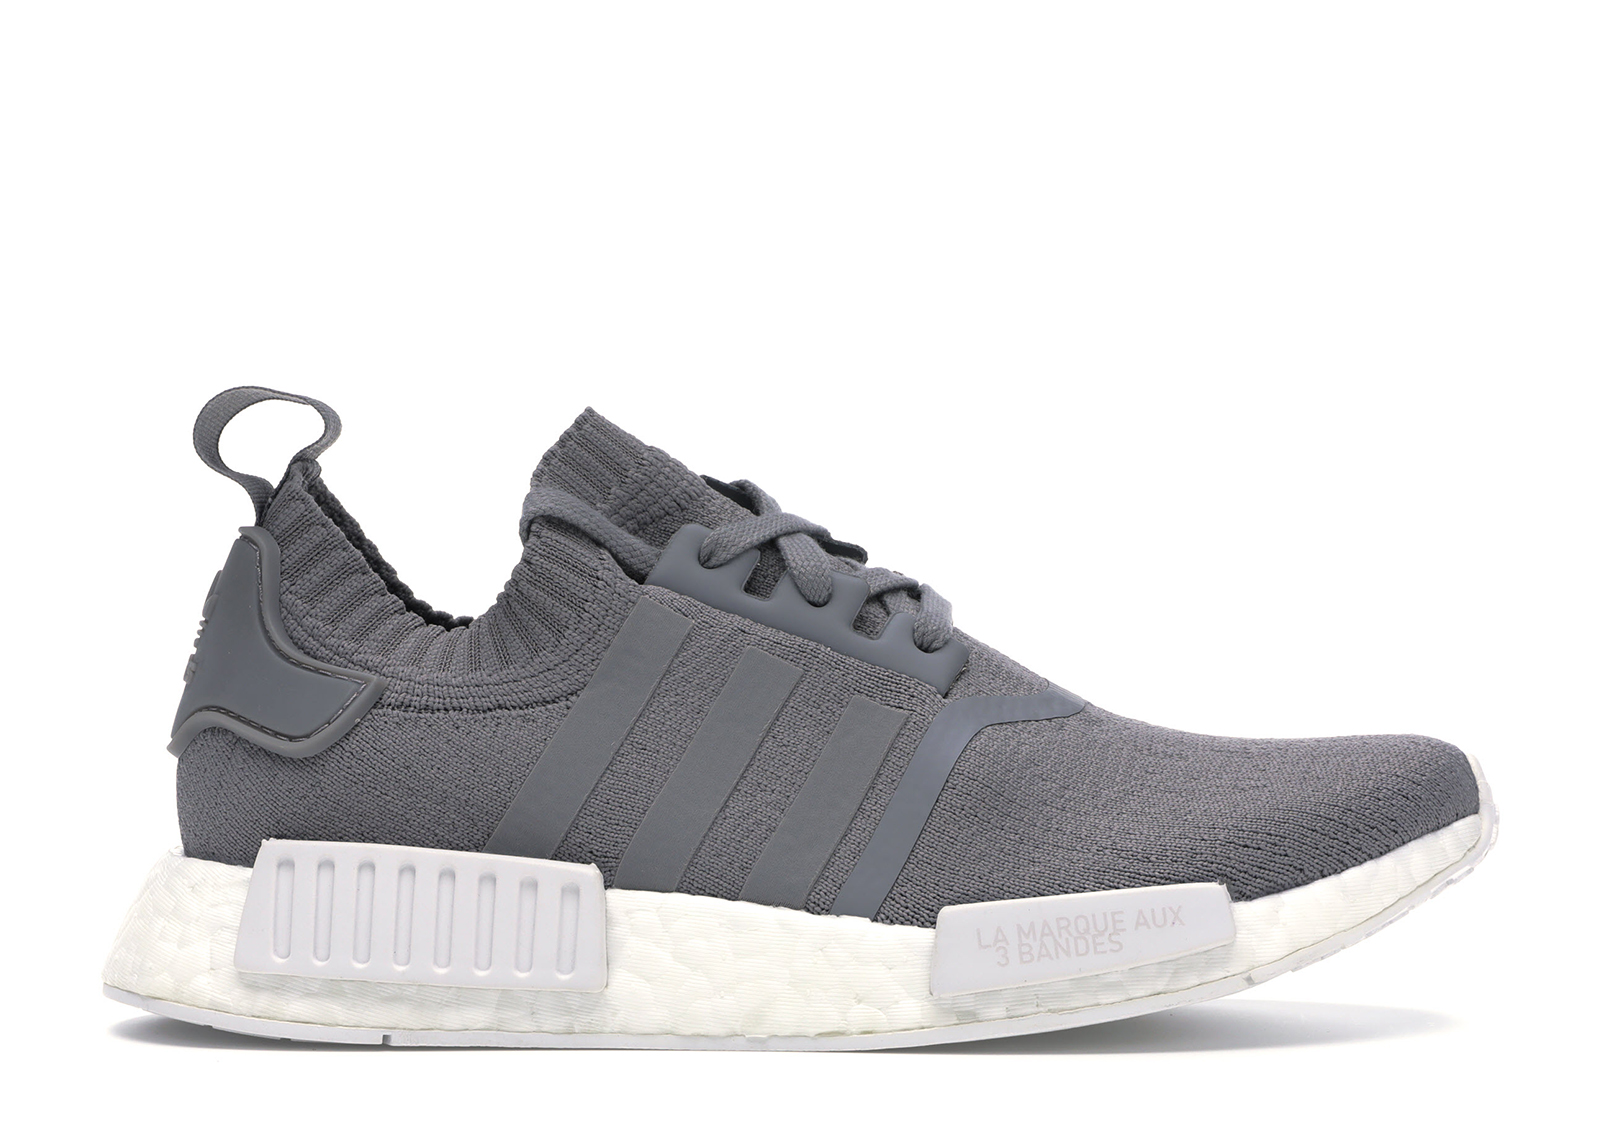 adidas NMD R1 Black Ombre (Women's)